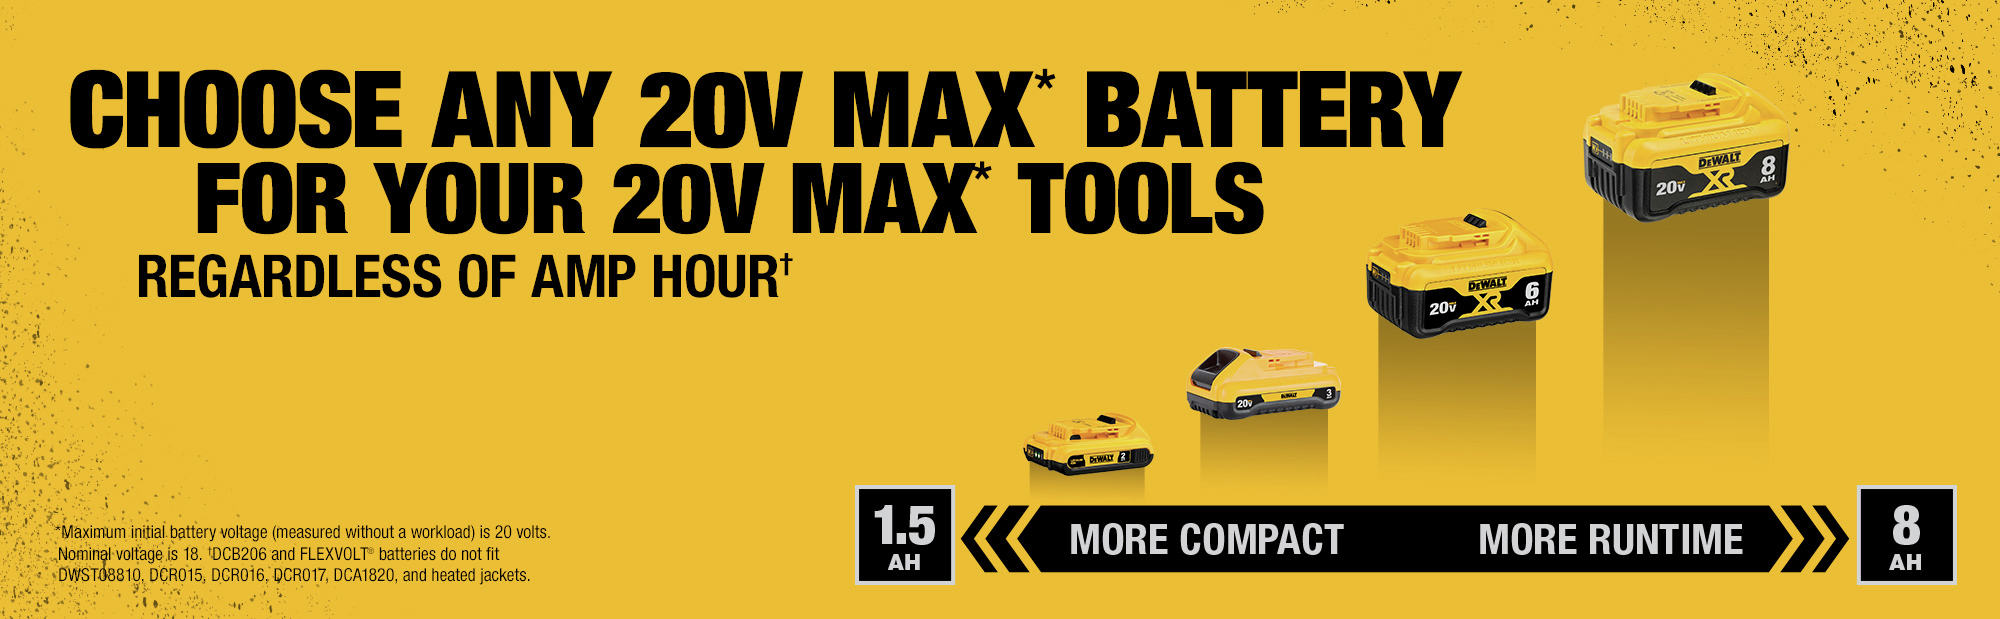 Choose Any 20V Max Battery For Your 20V Max Tools Regardless Of AMP Hour